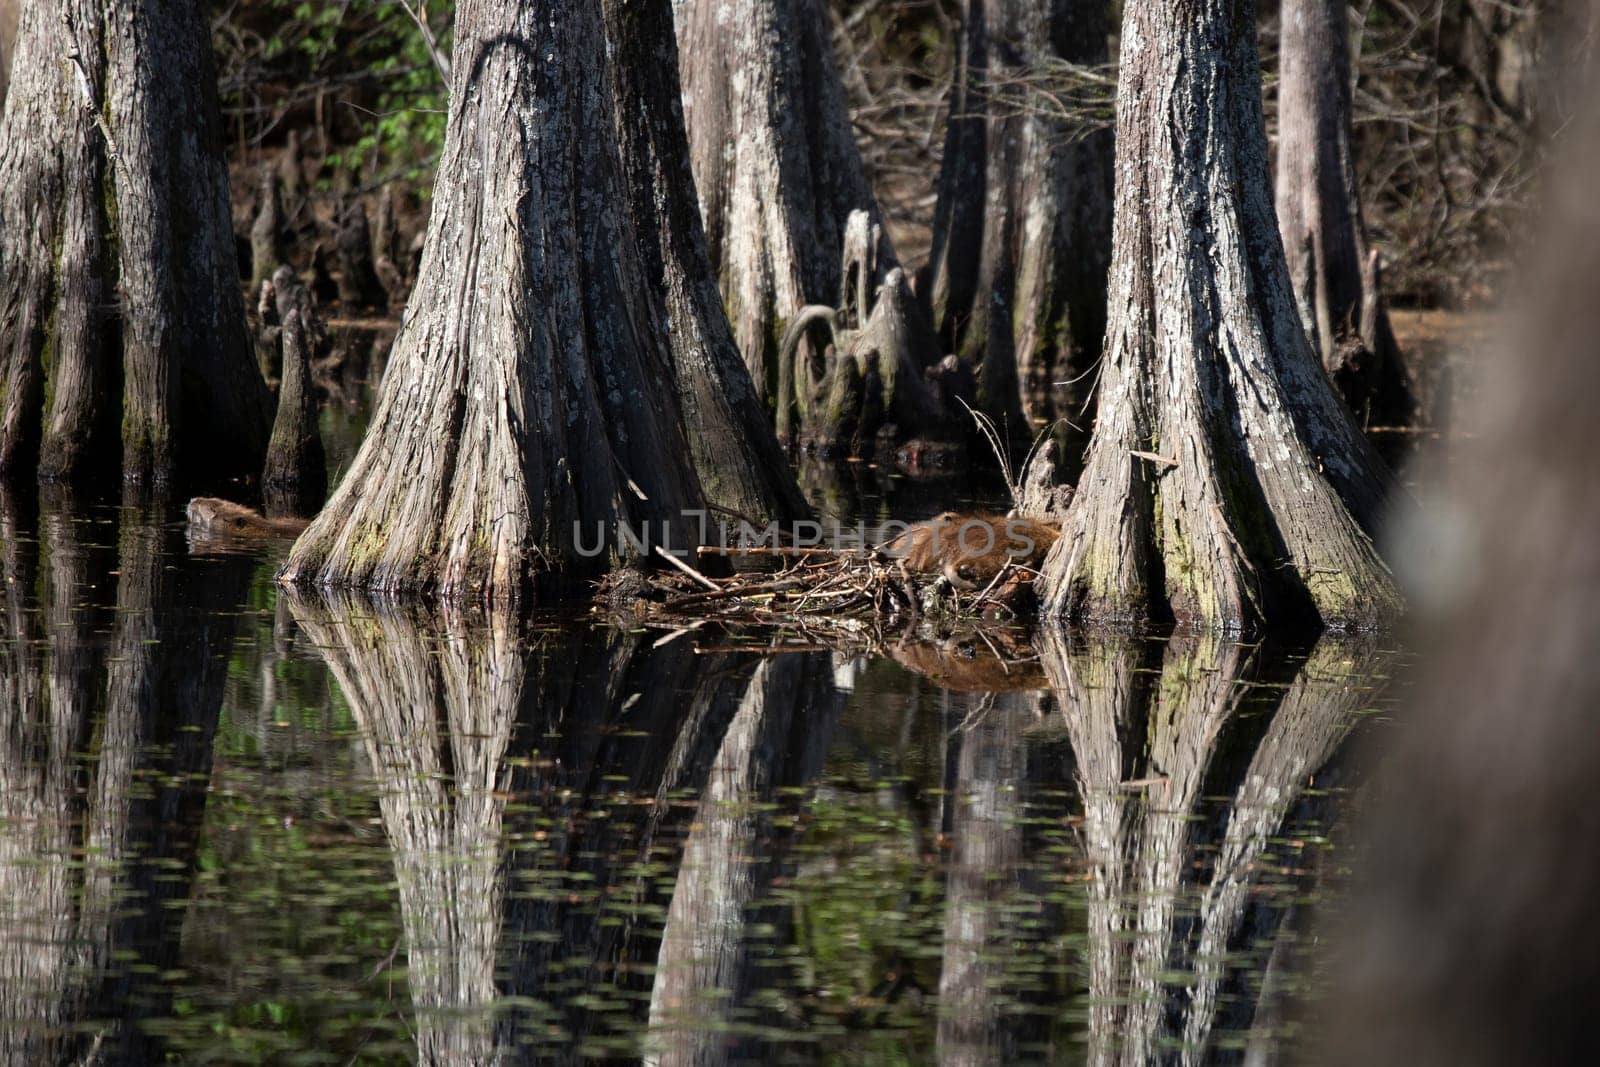 Adult nutria (Myocastor coypus) swimming in a swamp while a young nutria rests near another adult on a bed of sticks